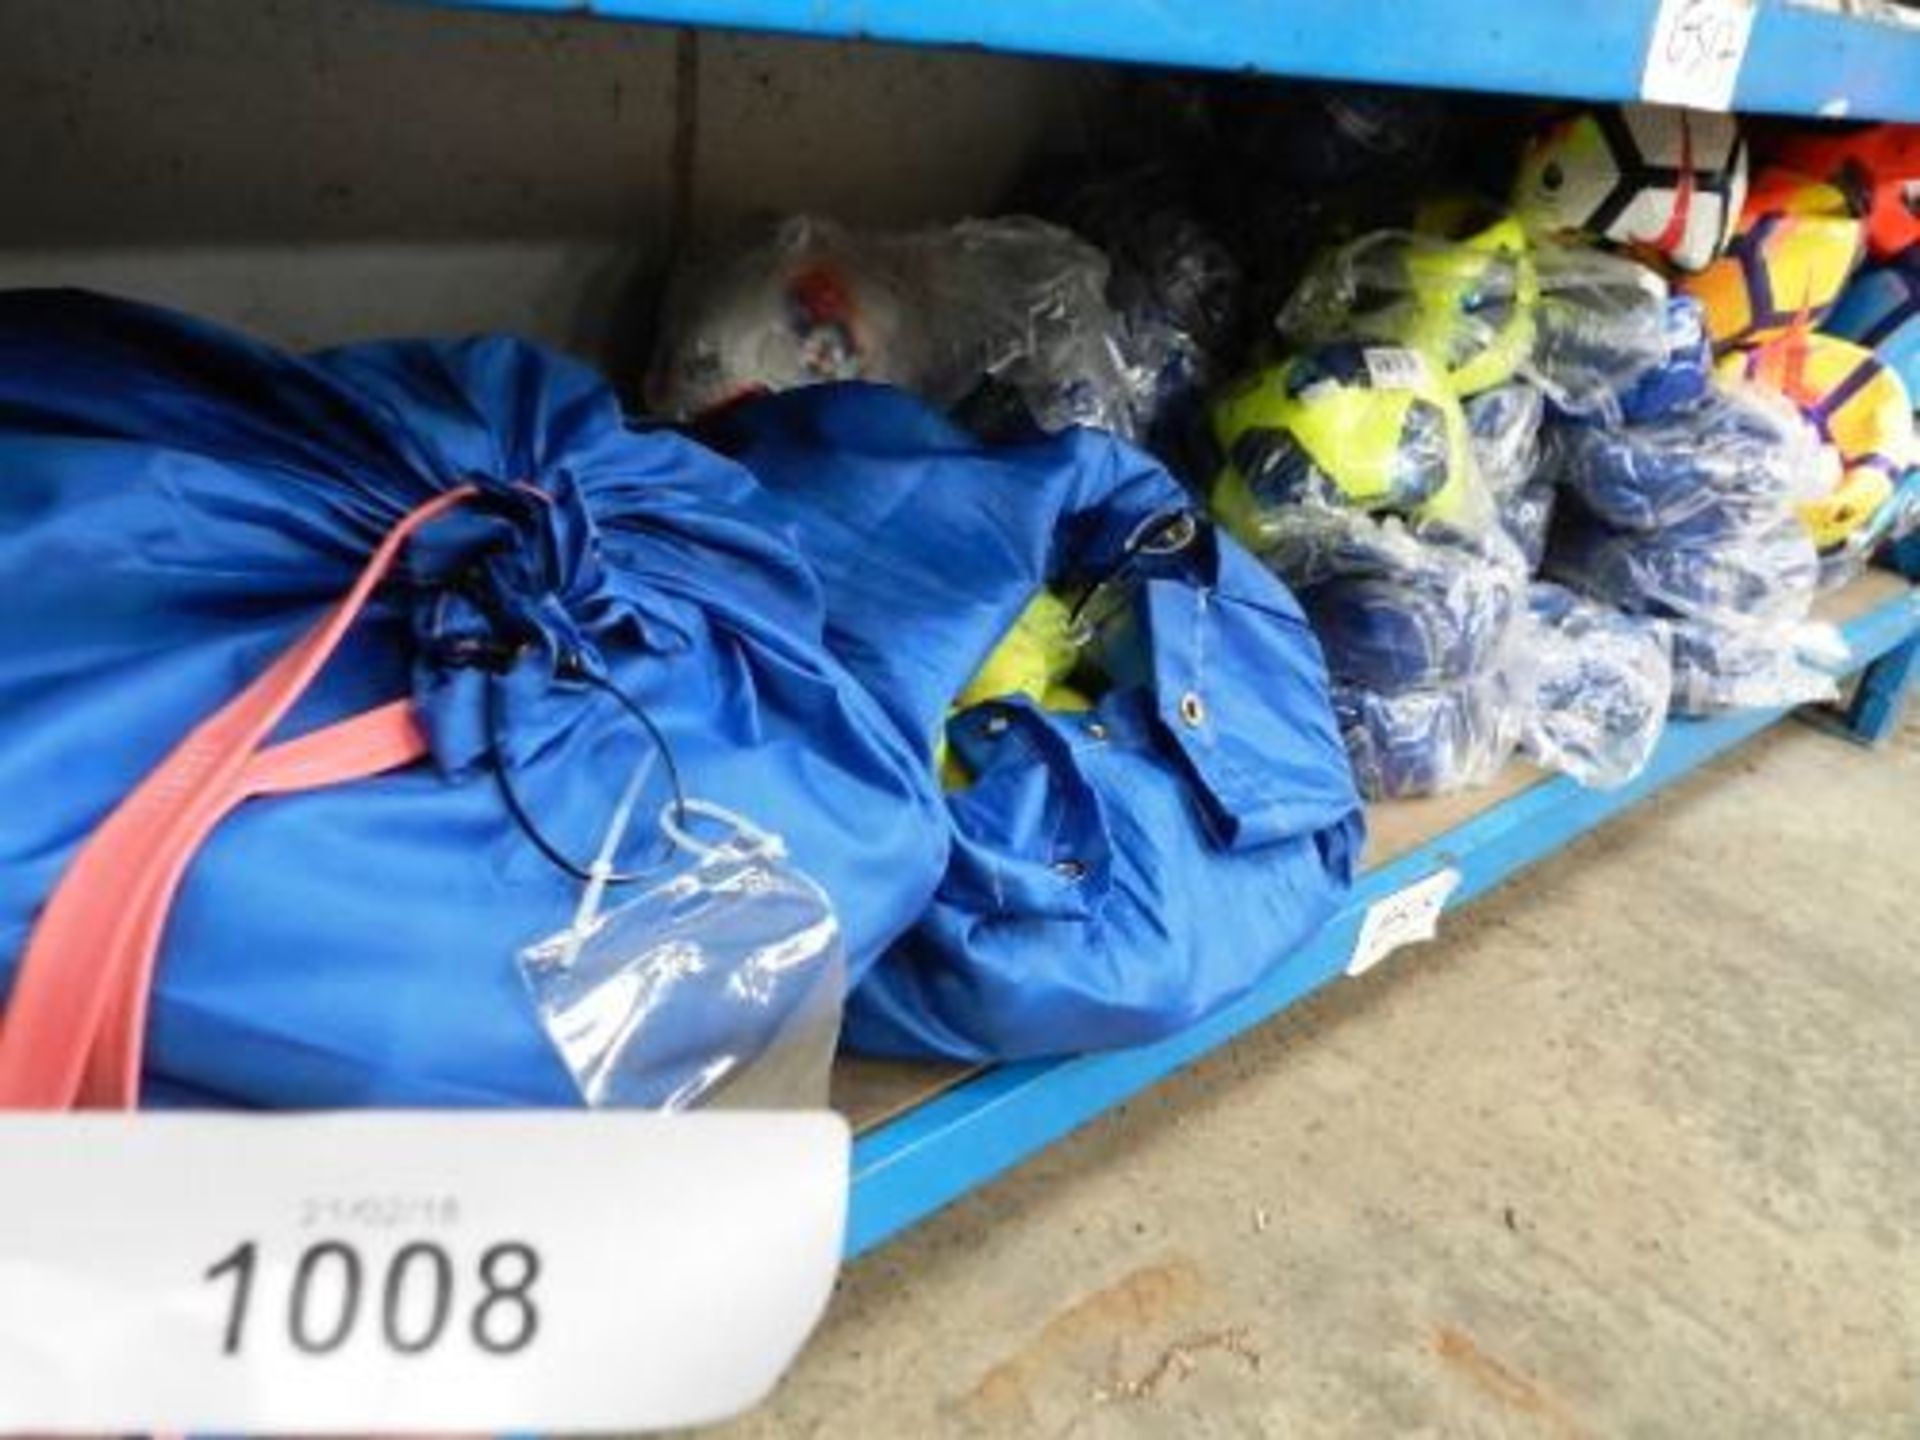 A shelf of footballs, brands include Nike, Adidas and Splay, size 5 and 3and 2 x bags of tennis